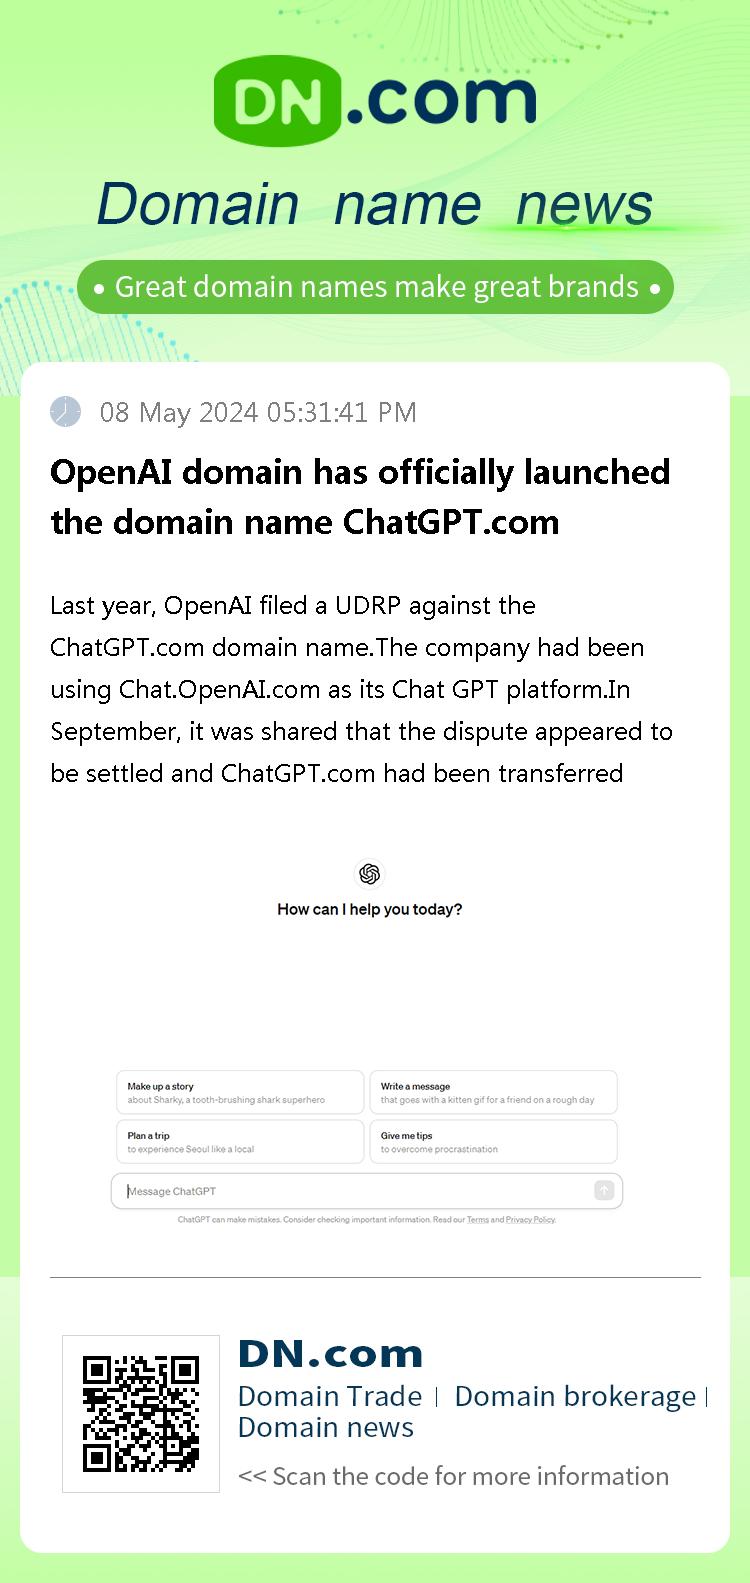 OpenAI domain has officially launched the domain name ChatGPT.com